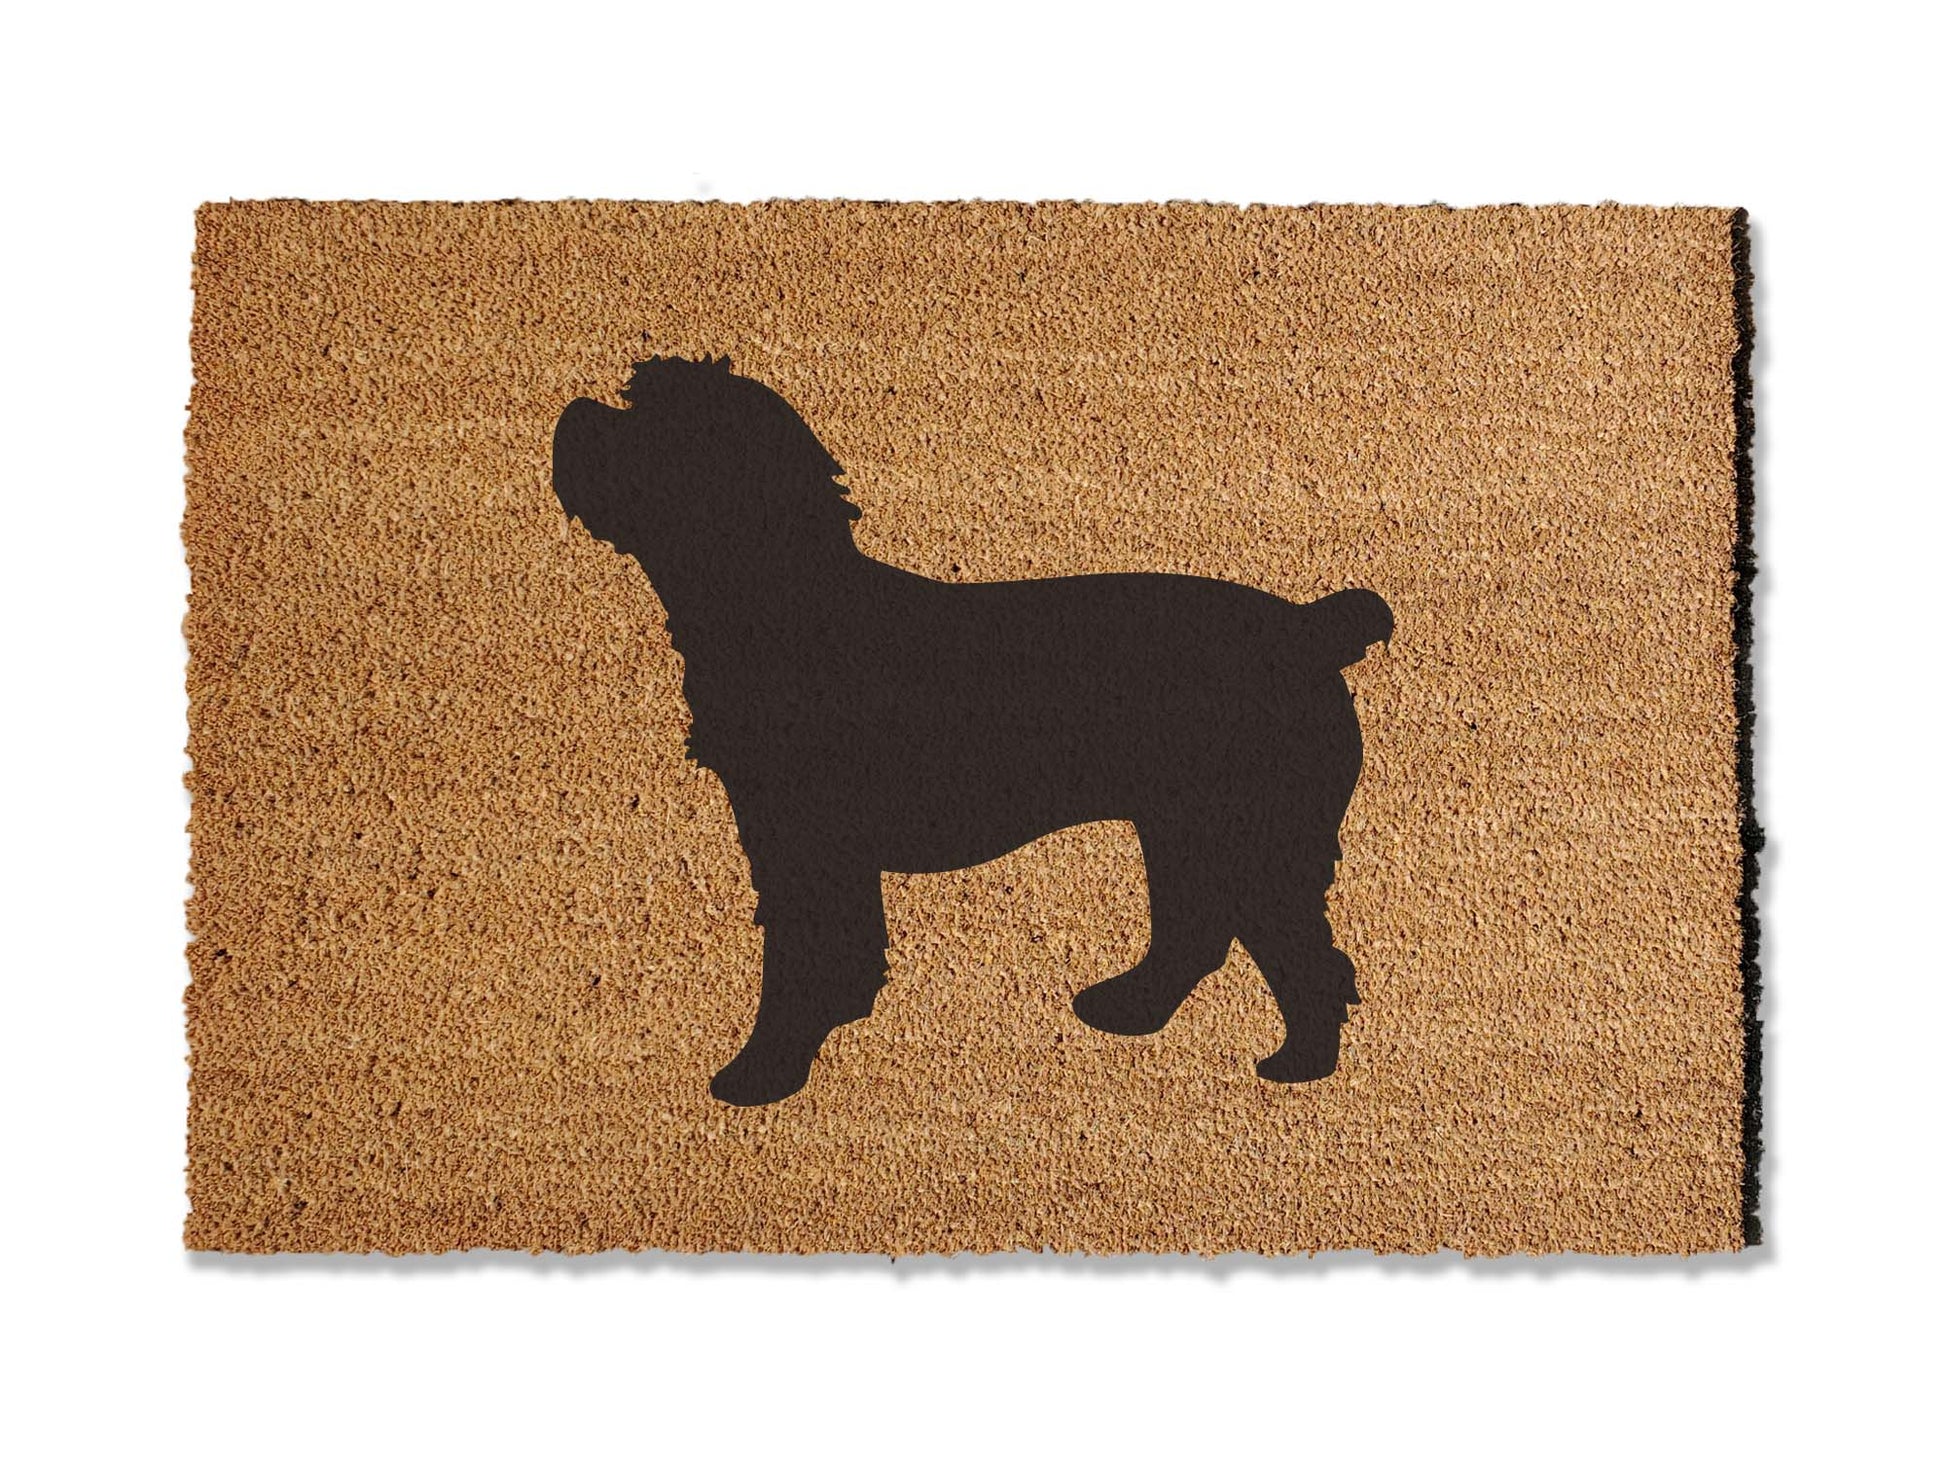 Elevate your entryway with our charming coir welcome doormat featuring an adorable Cockapoo Dog design. Available in multiple sizes, it's the perfect gift for dog lovers, adding a delightful touch to your home's first impression.